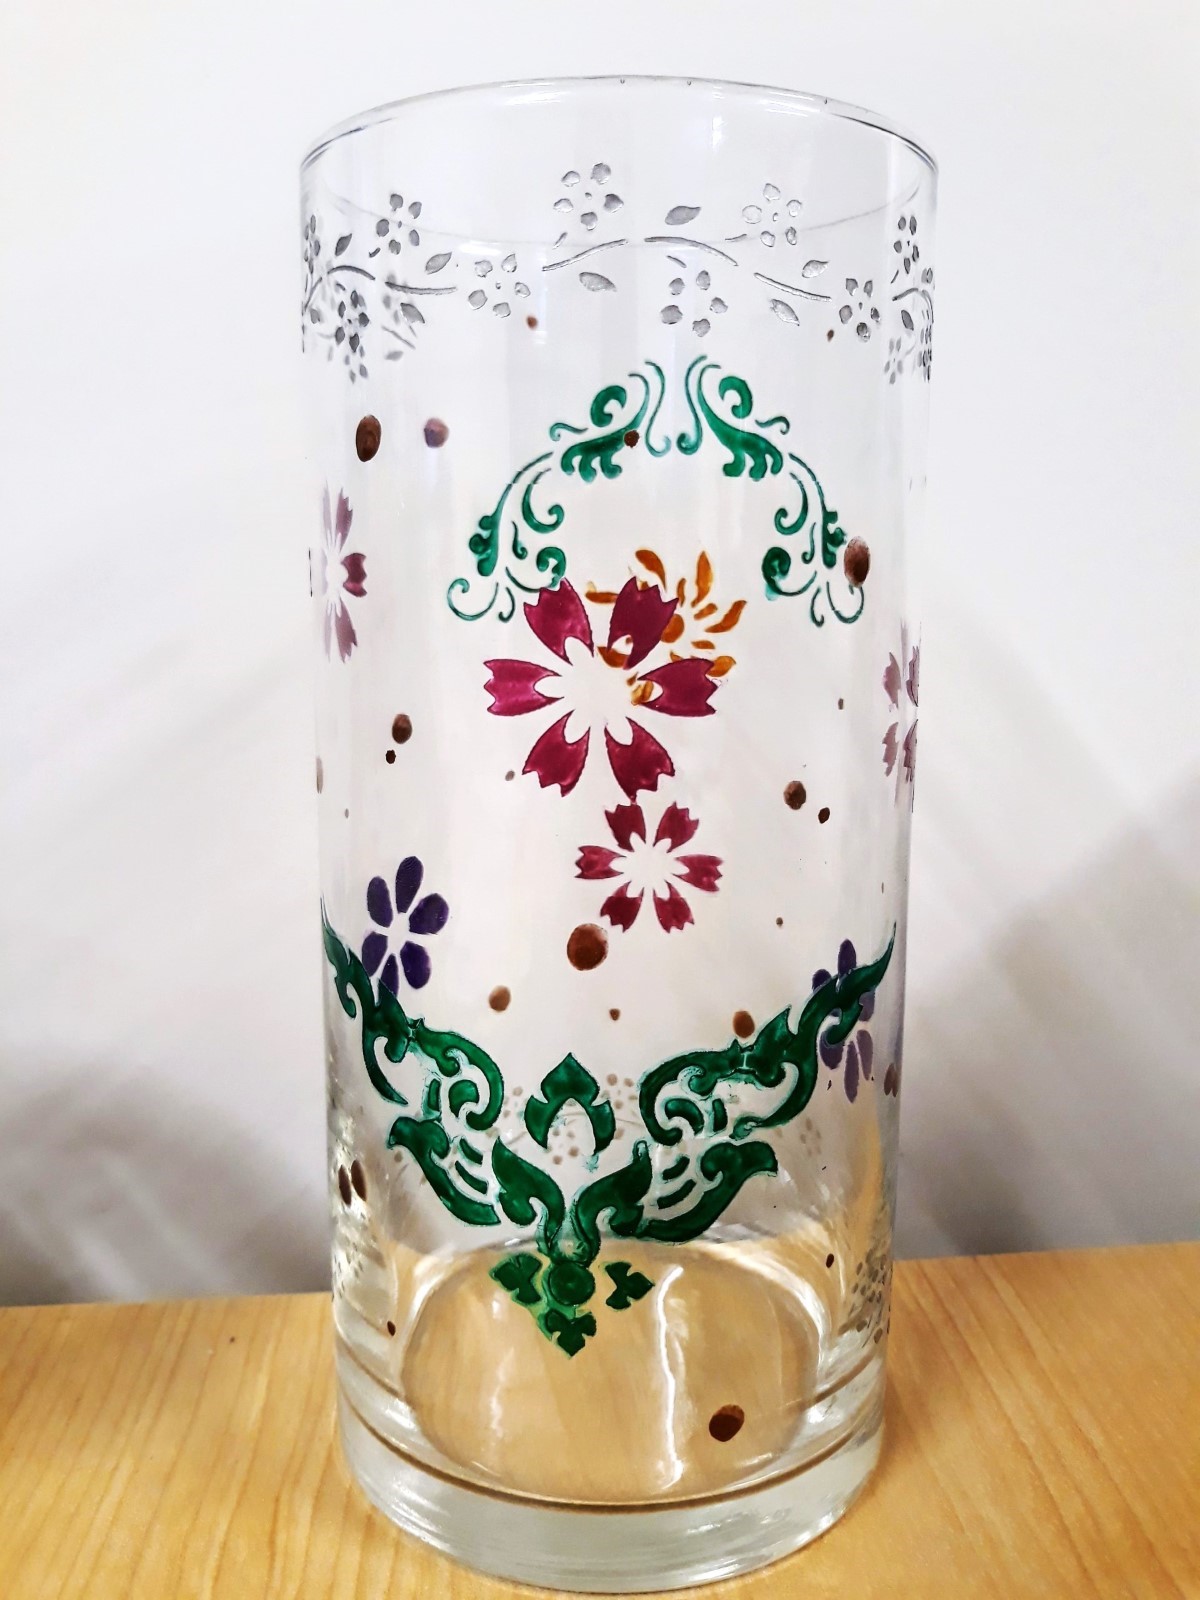 Image of the craft featuring a glass vase with colorful painted stenciled flowers and design.